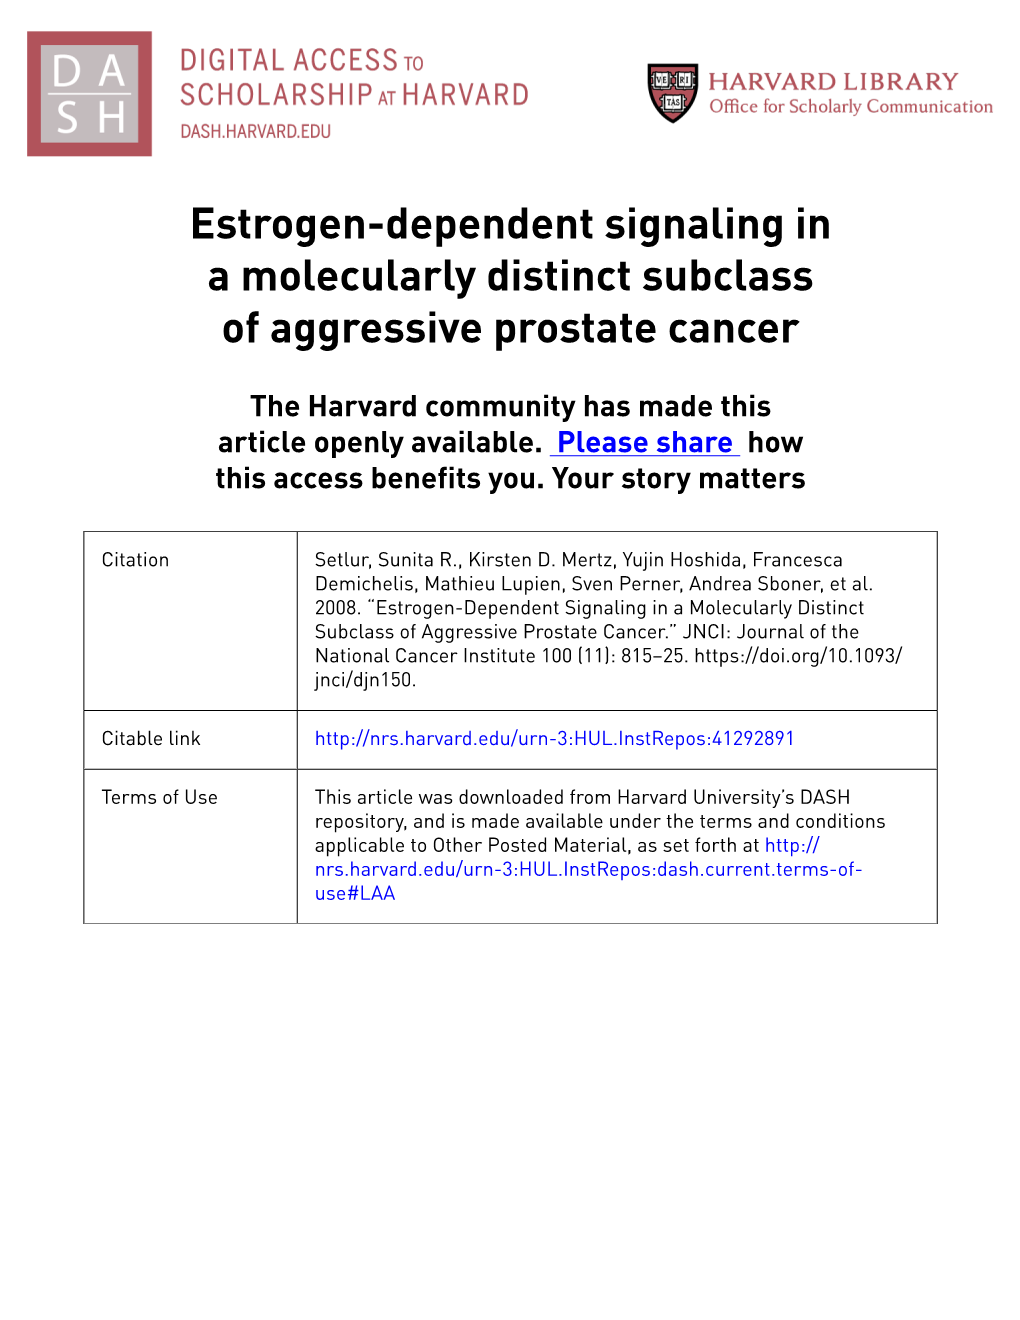 Estrogen-Dependent Signaling in a Molecularly Distinct Subclass of Aggressive Prostate Cancer